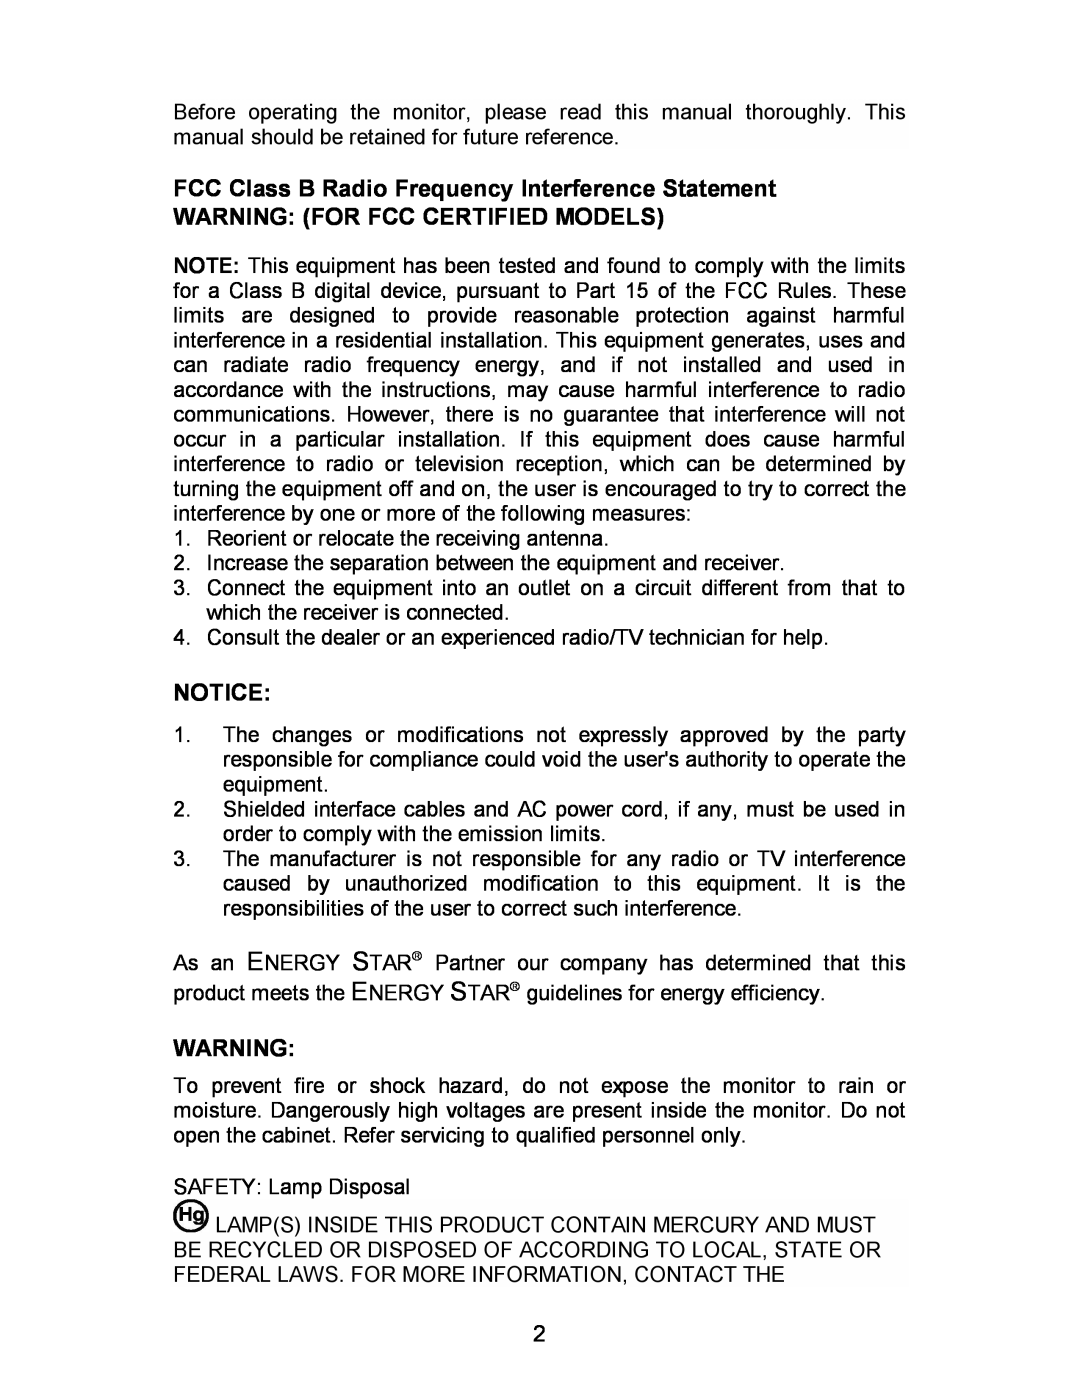 AOC 193FWK manual FCC Class B Radio Frequency Interference Statement, Warning For Fcc Certified Models 